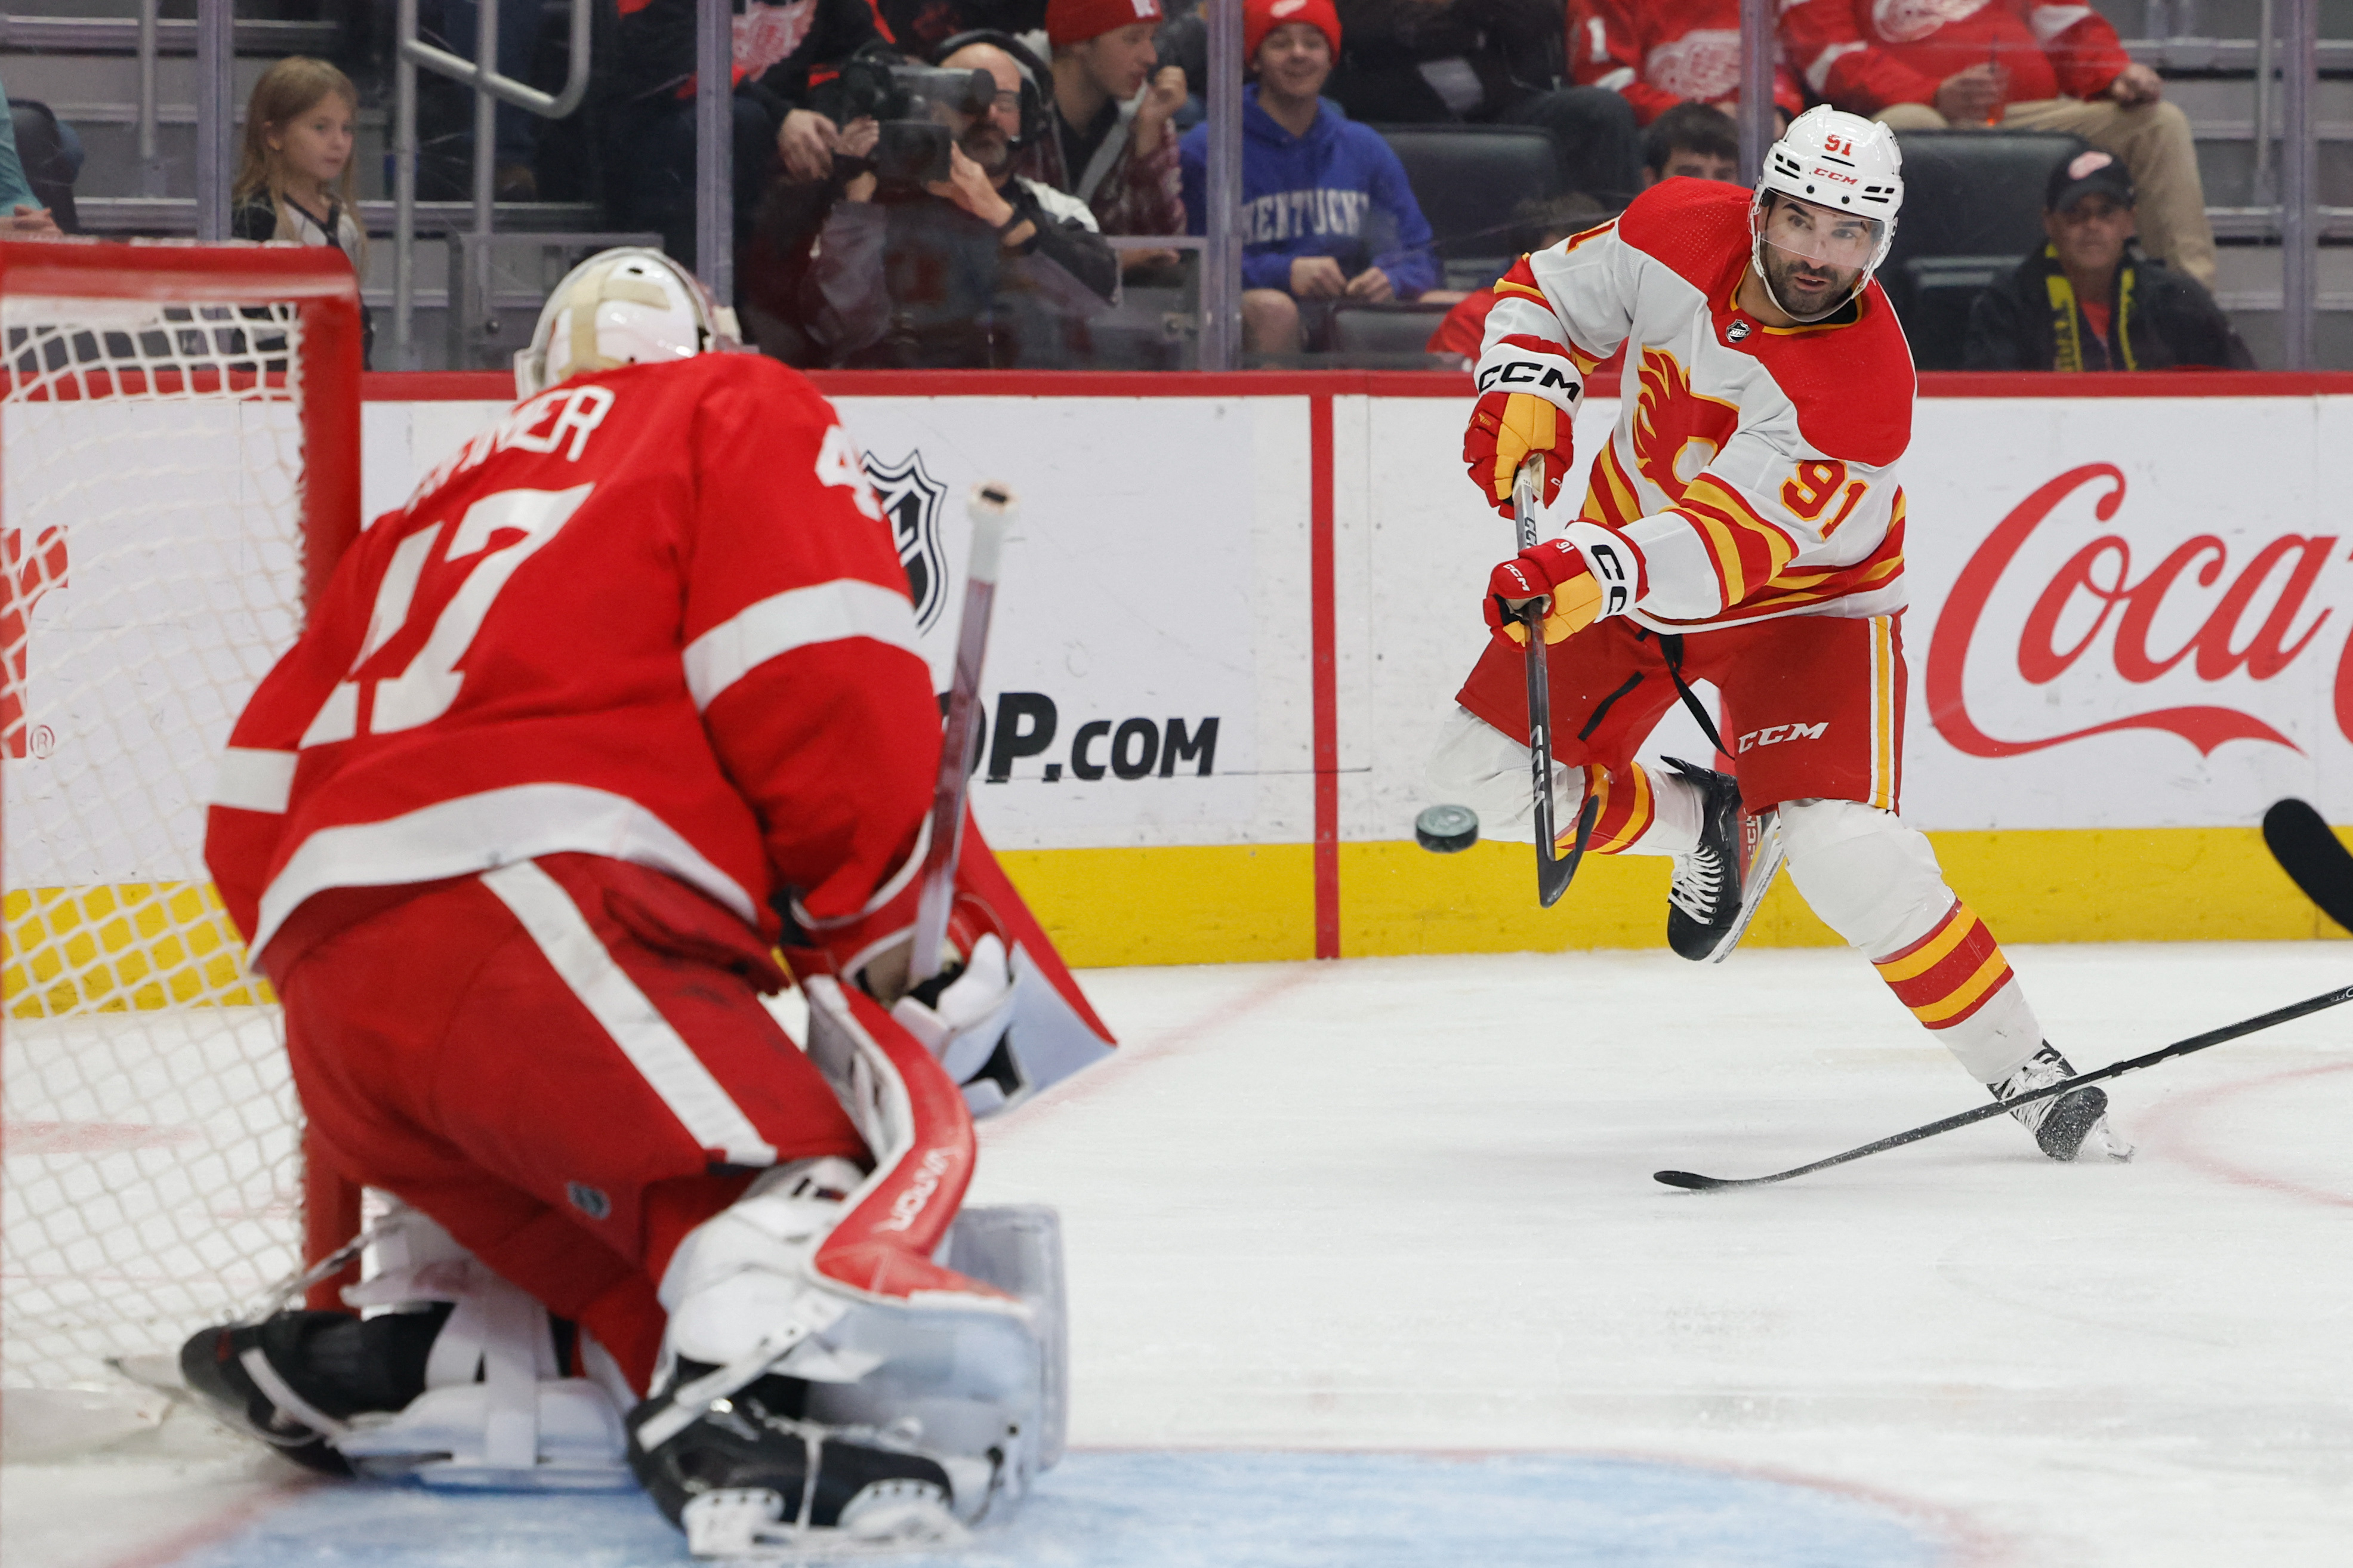 DeBrincat scores 3 goals as Red Wings beat Flames for 5th straight